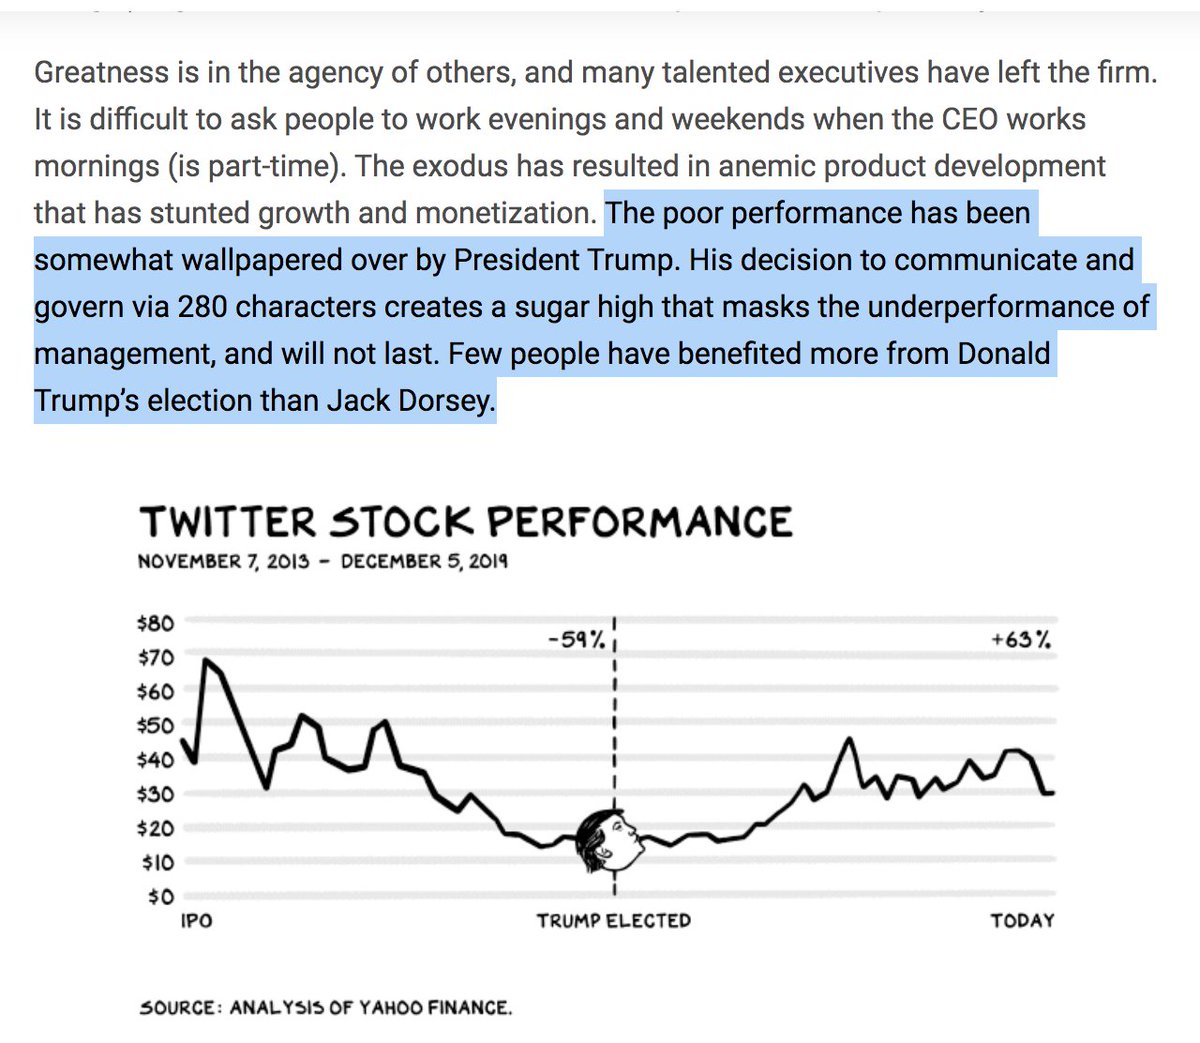 Open letter from Twitter investor, NYU prof Scott Galloway to Twitter Exec Chair BoD:"The poor performance has been somewhat wallpapered over by  @POTUS. His decision to communicate and govern via 280 characters creates a sugar high"  $TWTR https://www.profgalloway.com/twtr-enough-already  @profgalloway